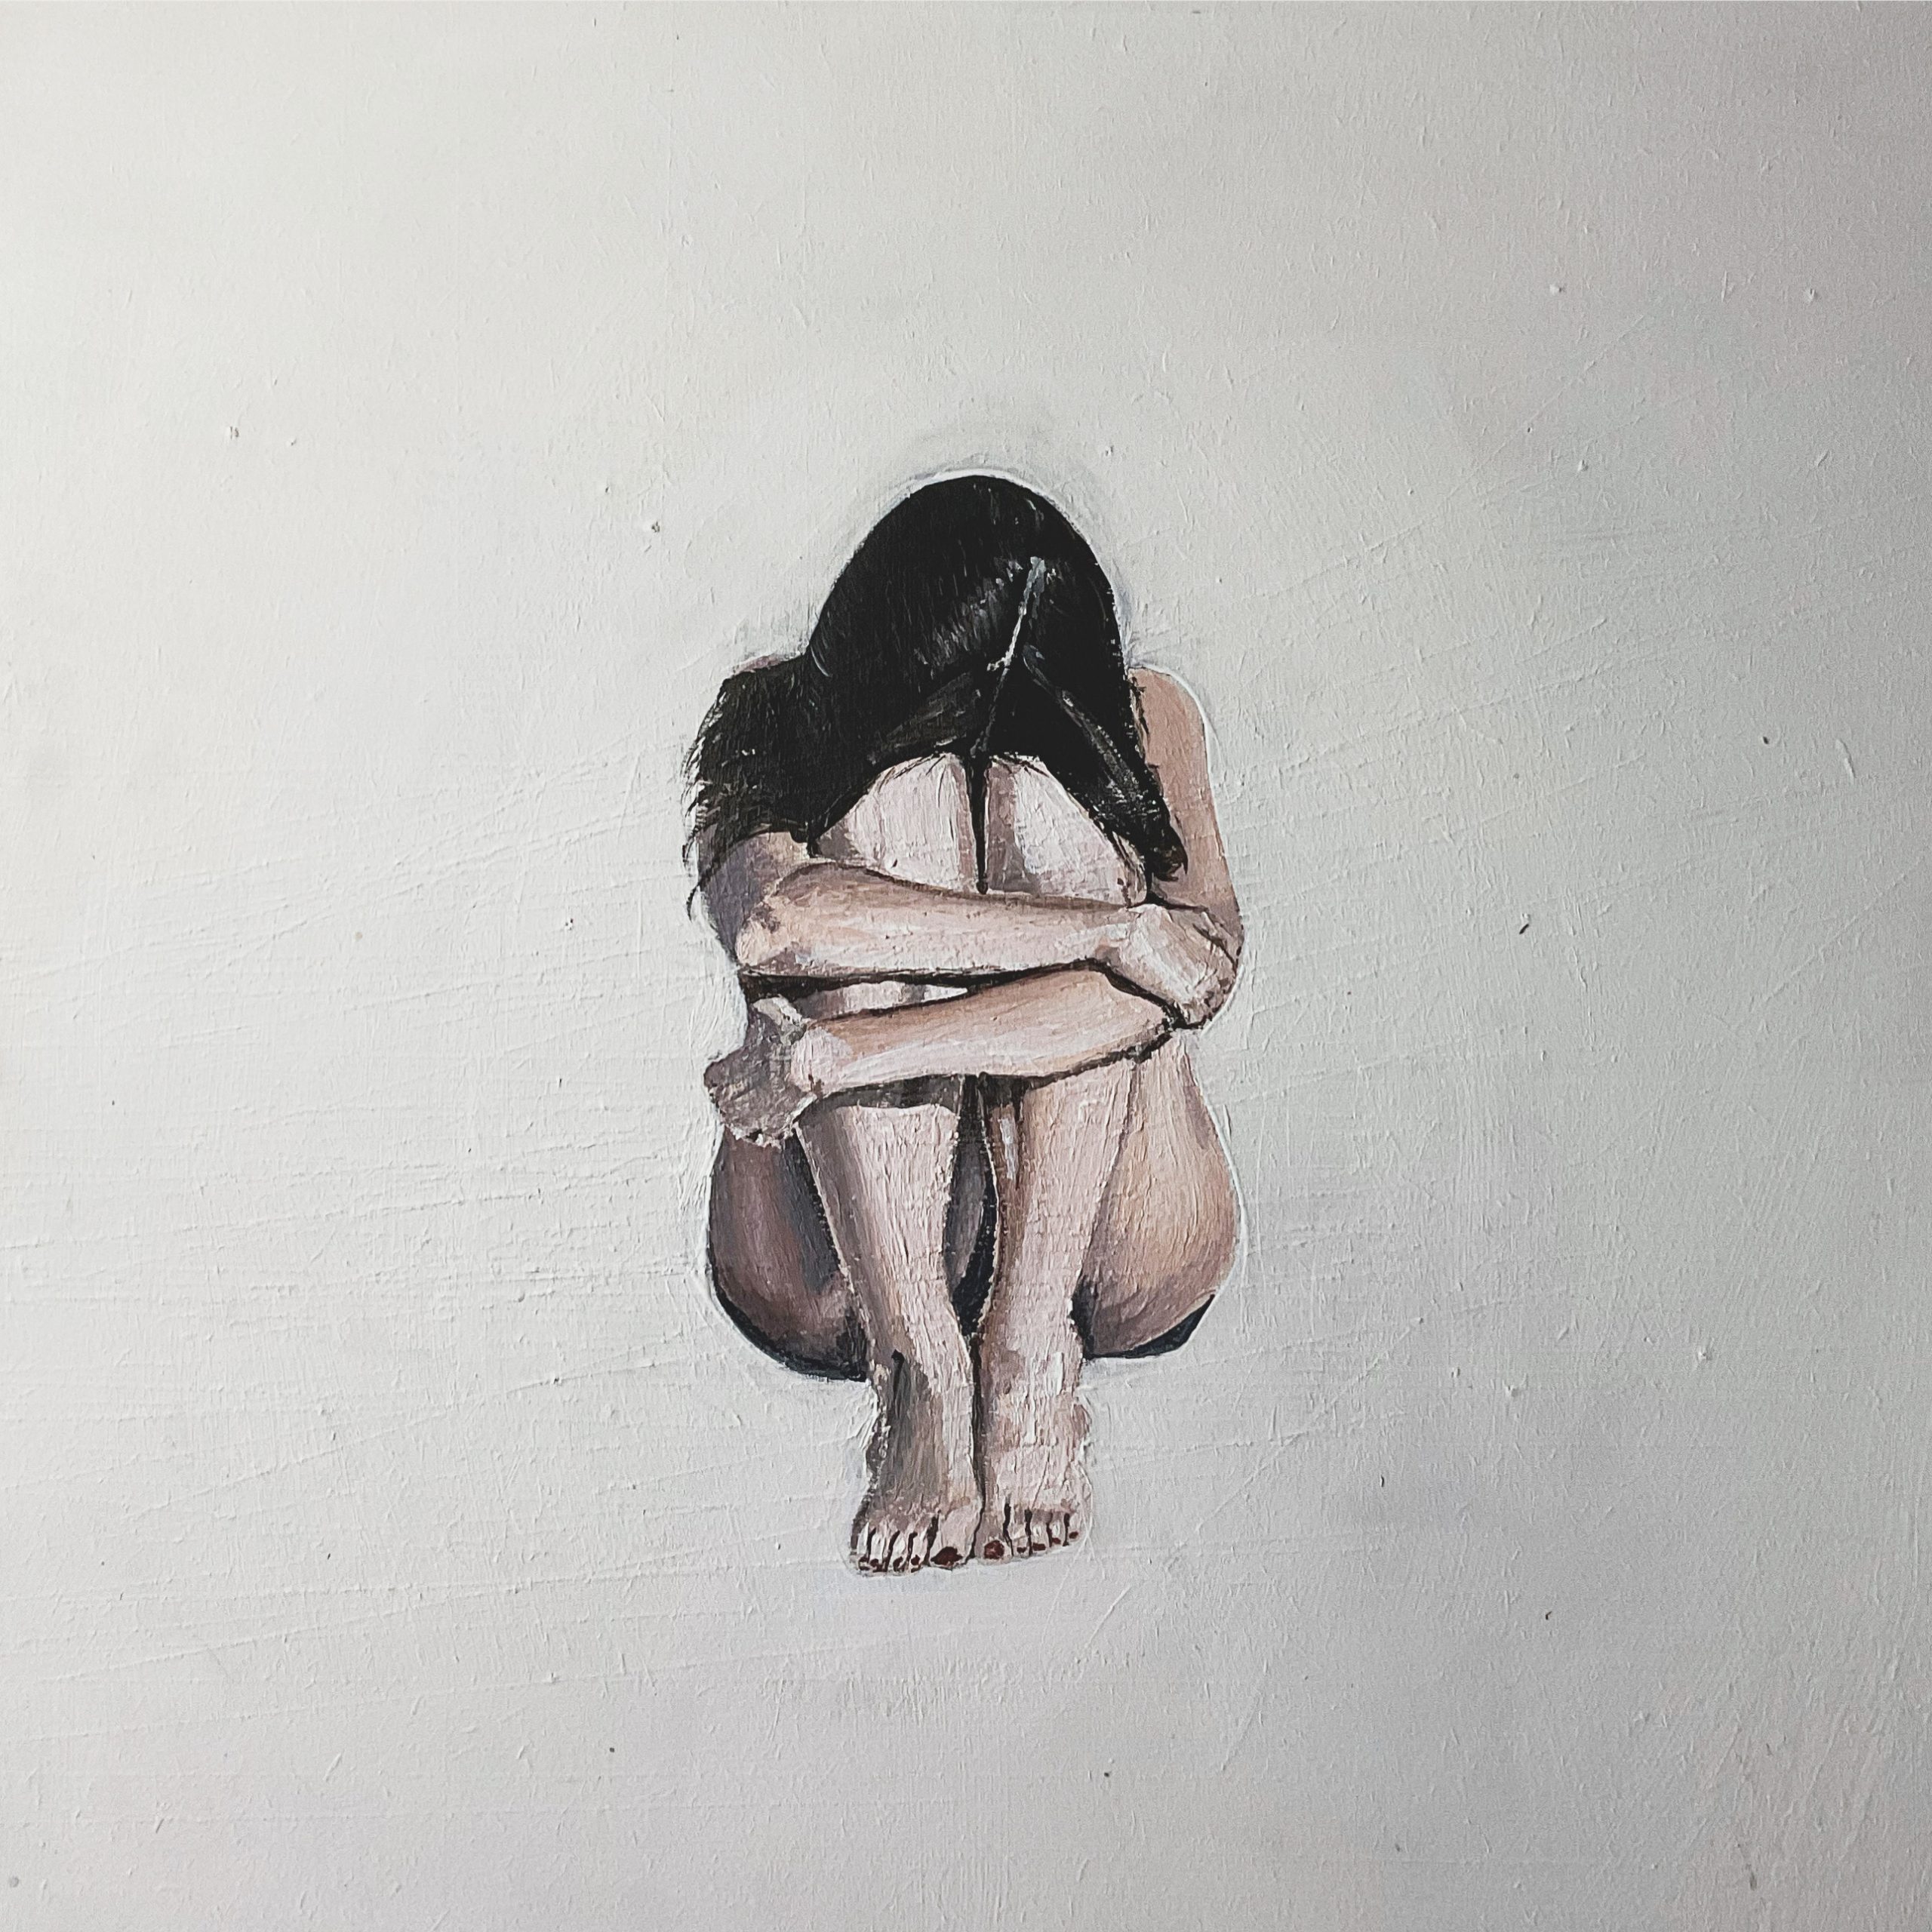 a painting of a woman sat in a foetal position representing how women can make themselves small to fit in or make others feel more comfortable.It also represents how women's voices can feel small in the world and how they sometimes struggle to take up their own space.